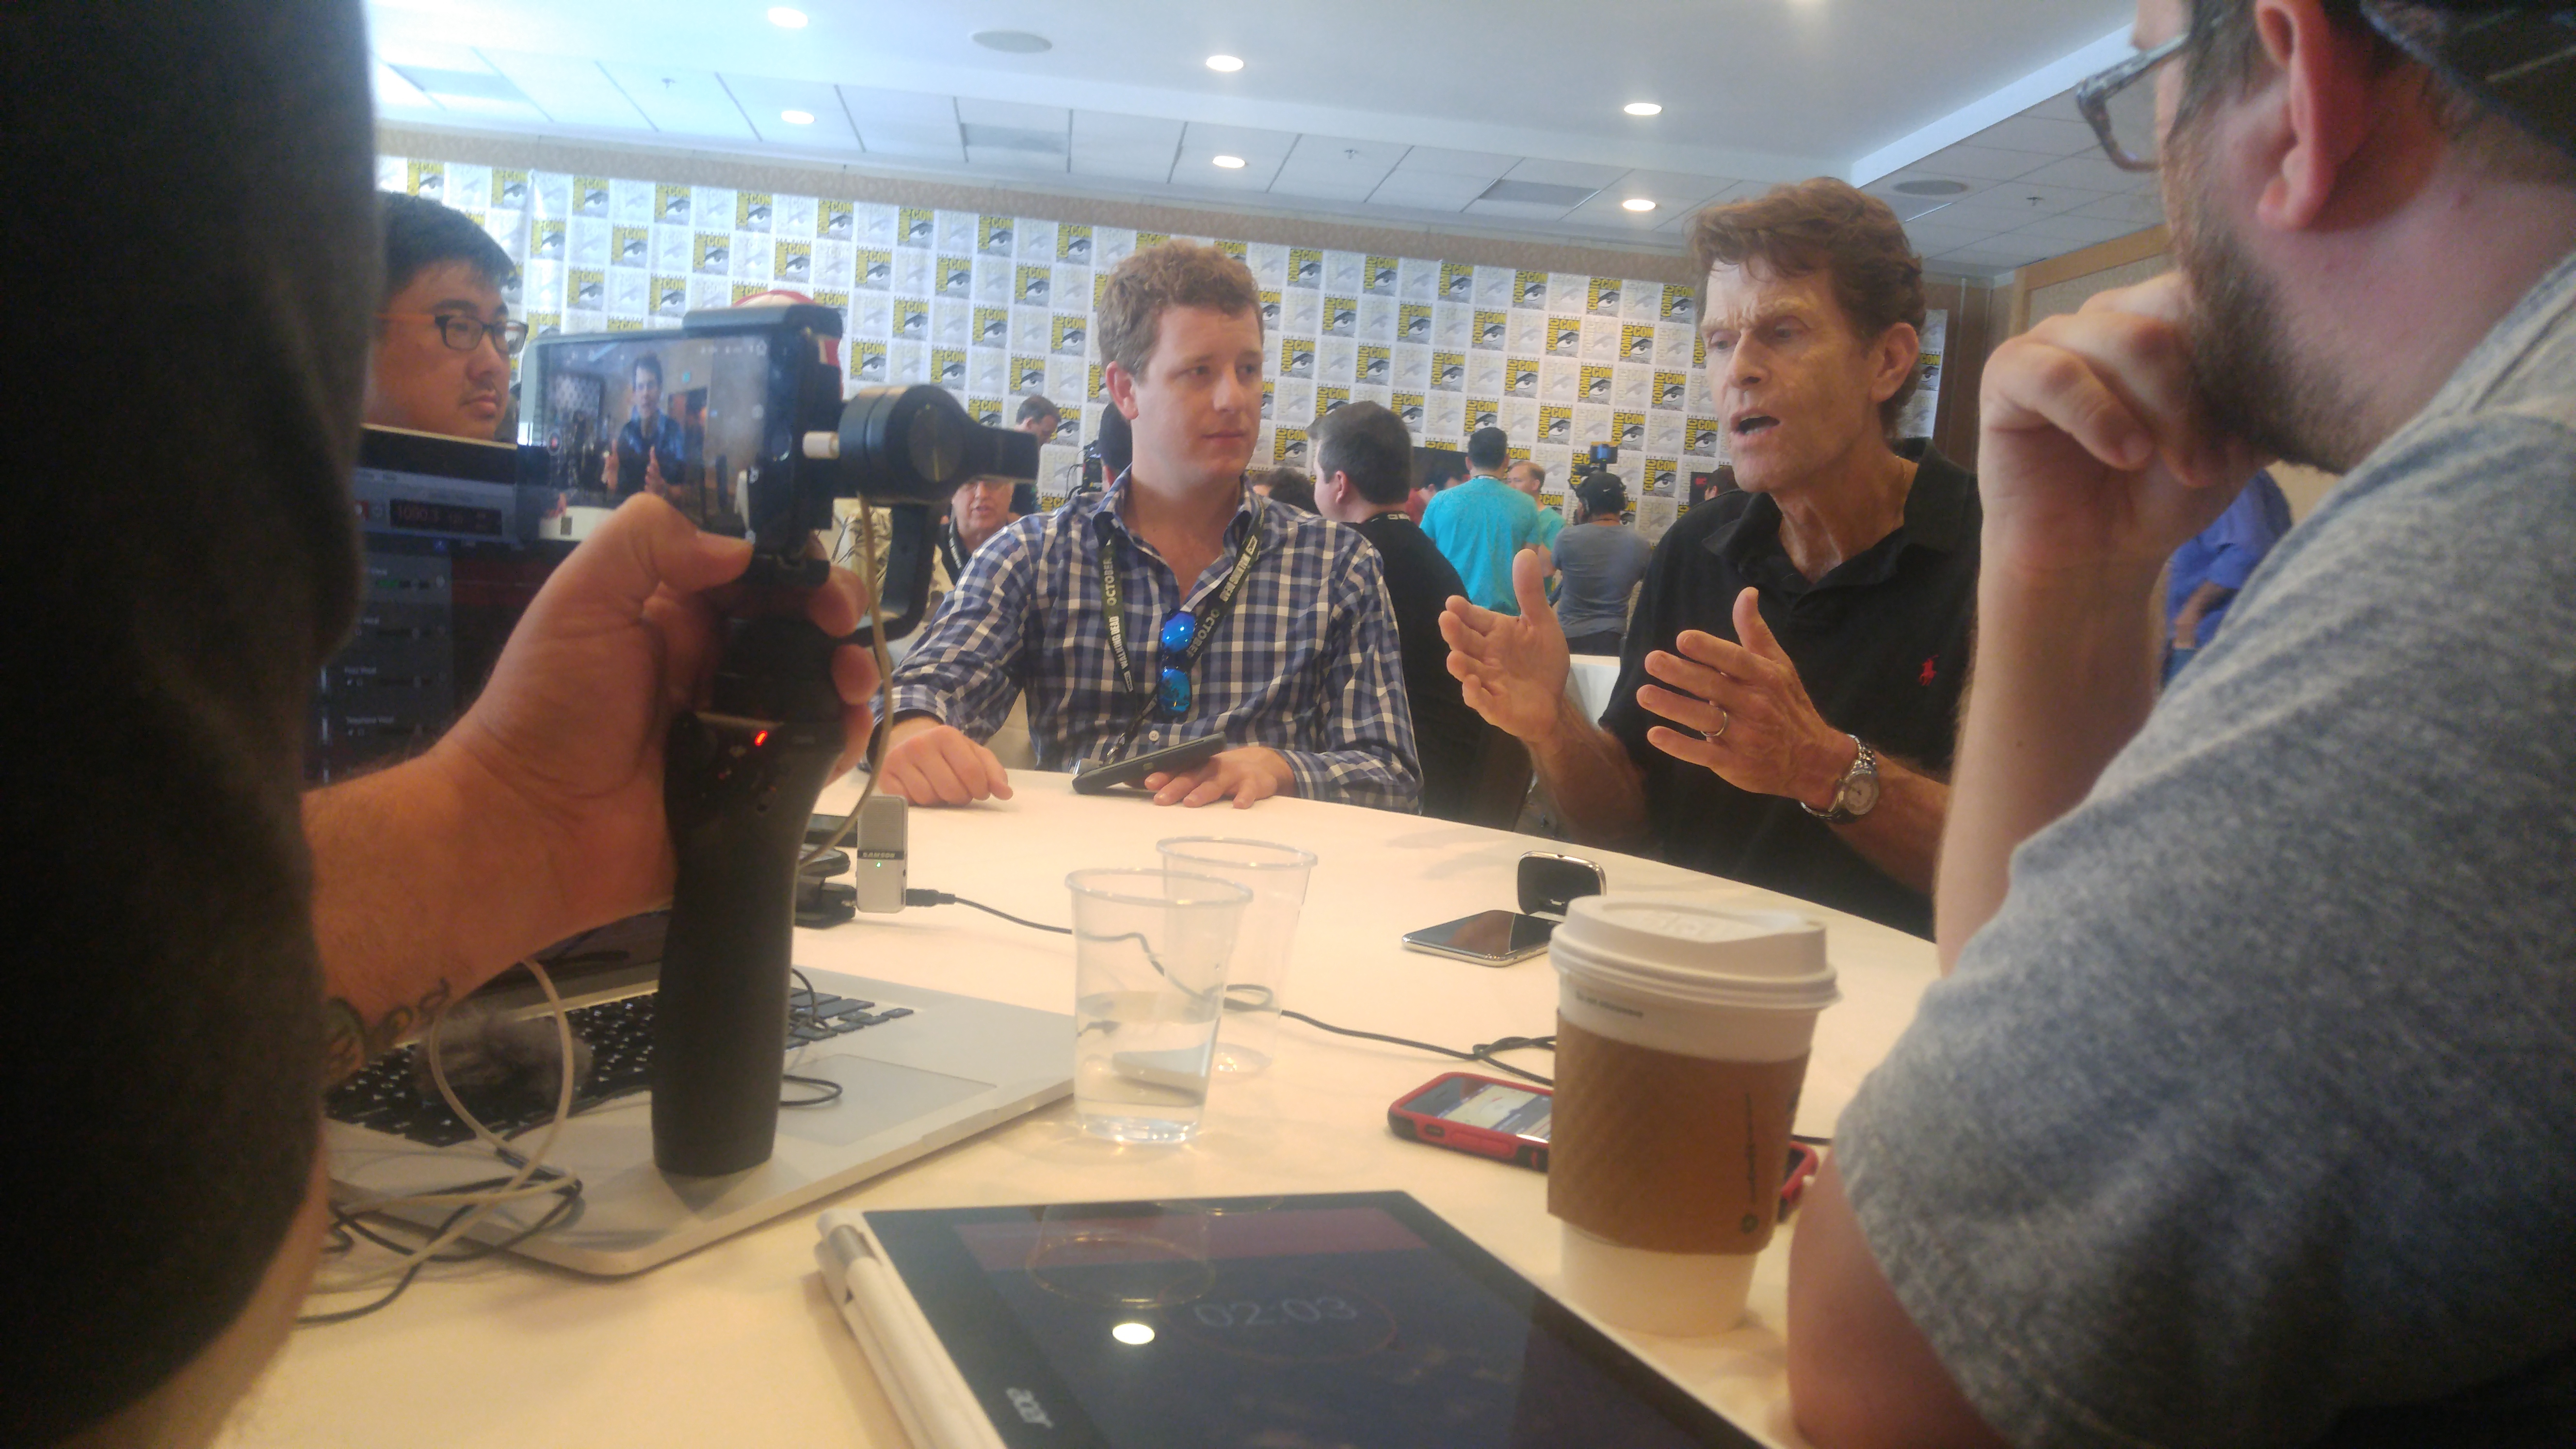 Kevin Conroy at the 2018 San Diego Comic Con